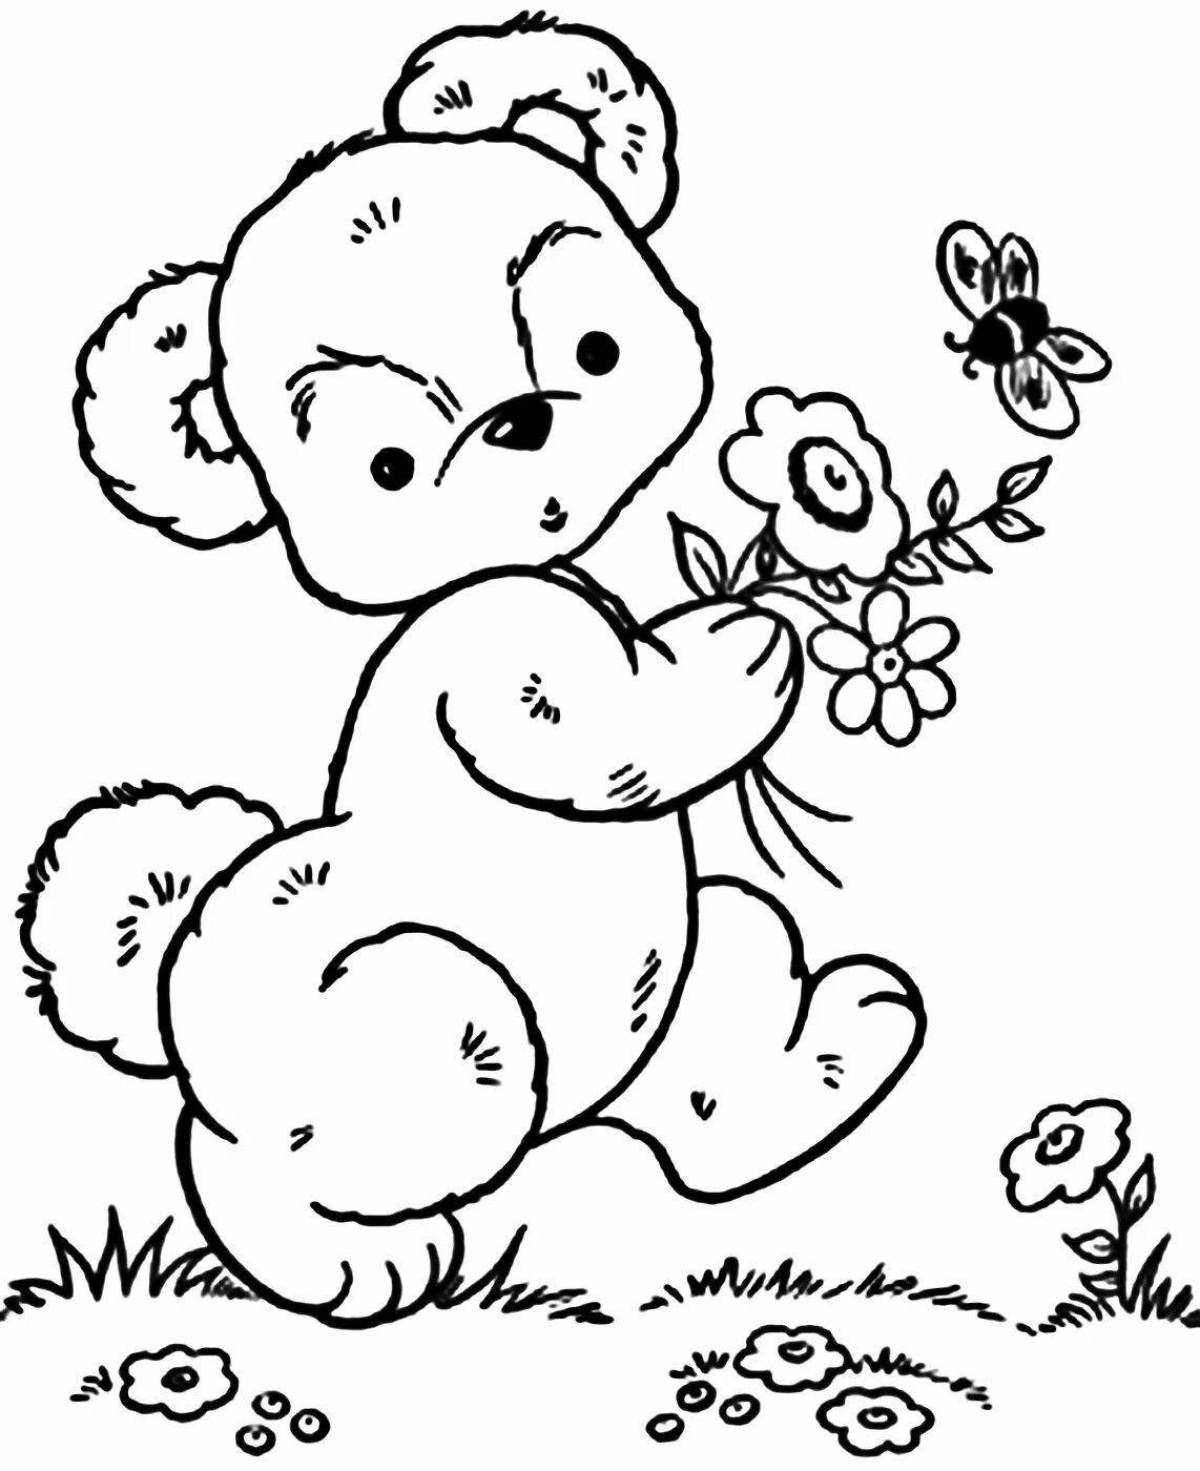 Teddy bear coloring page content